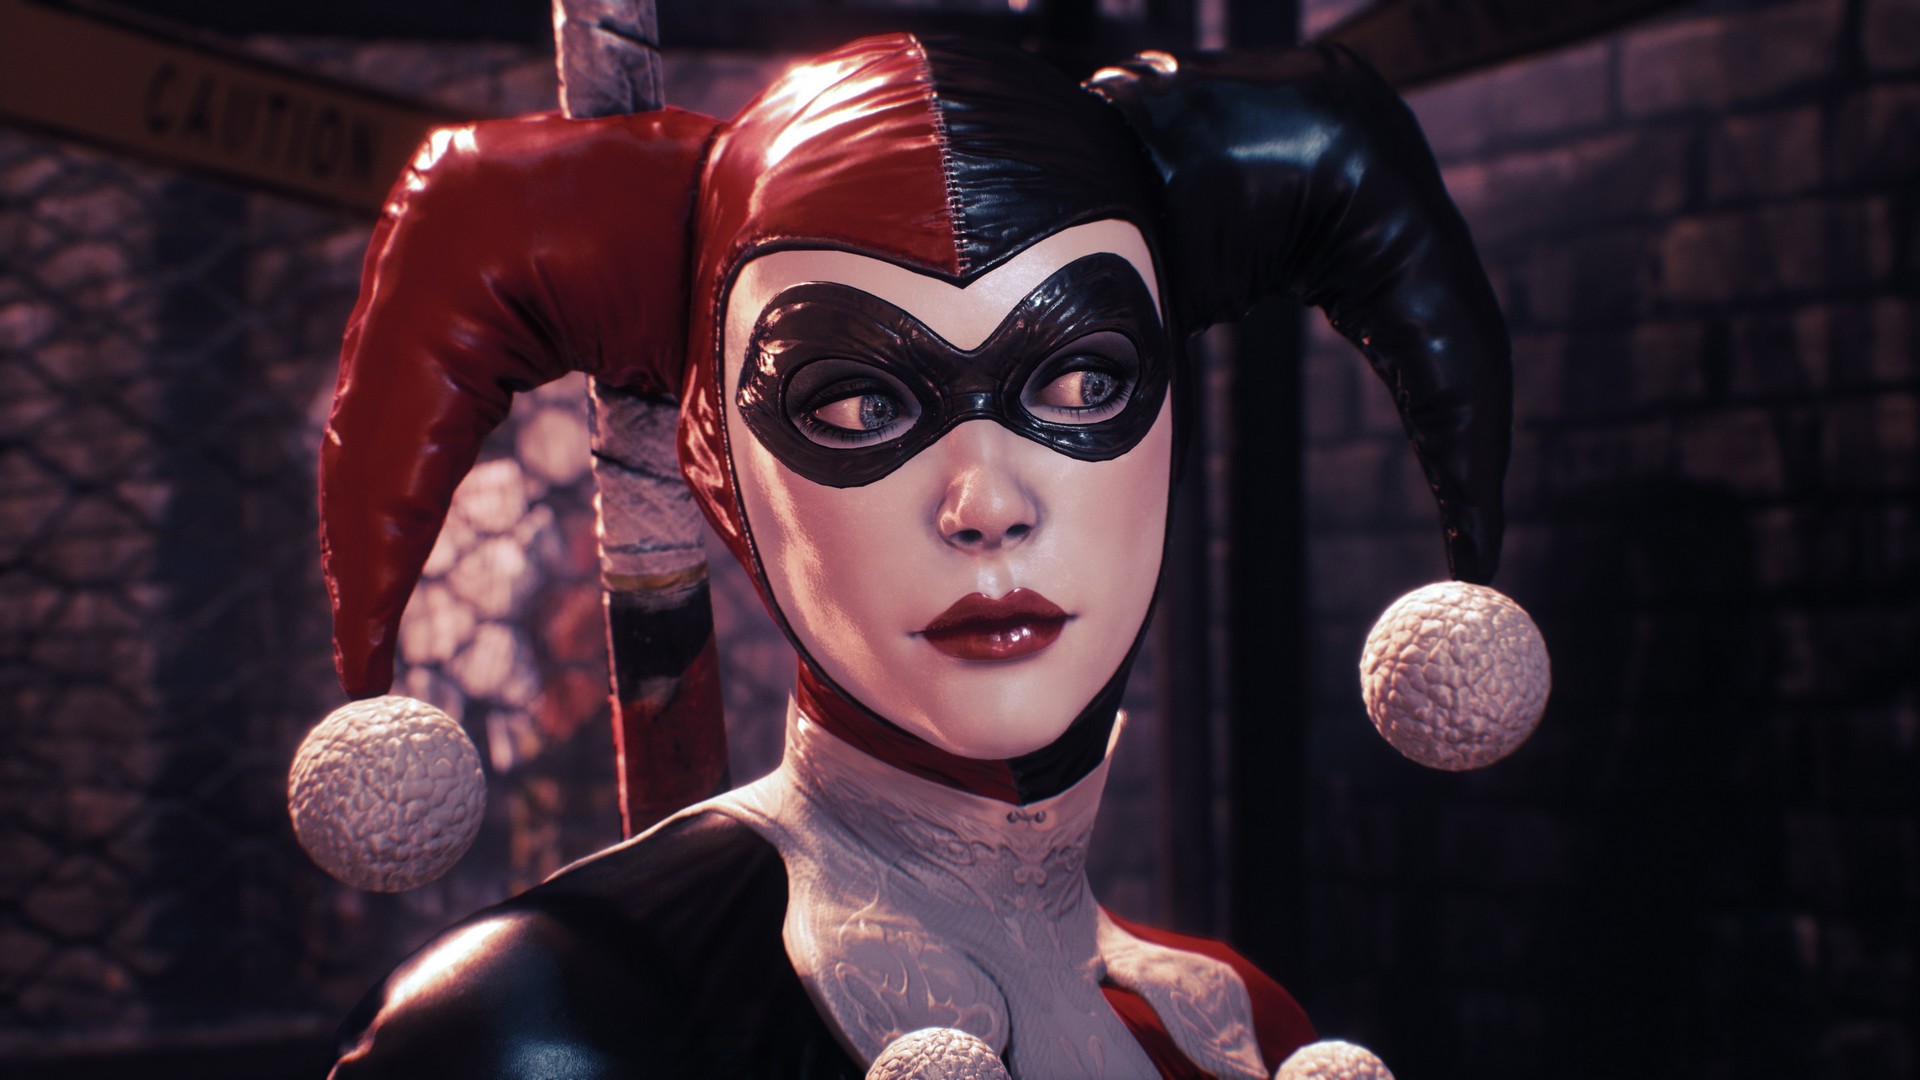 Harley Quinn Costume HD Backgrounds with image resolution 1920x1080 pixel. You can make this wallpaper for your Desktop Computer Backgrounds, Mac Wallpapers, Android Lock screen or iPhone Screensavers